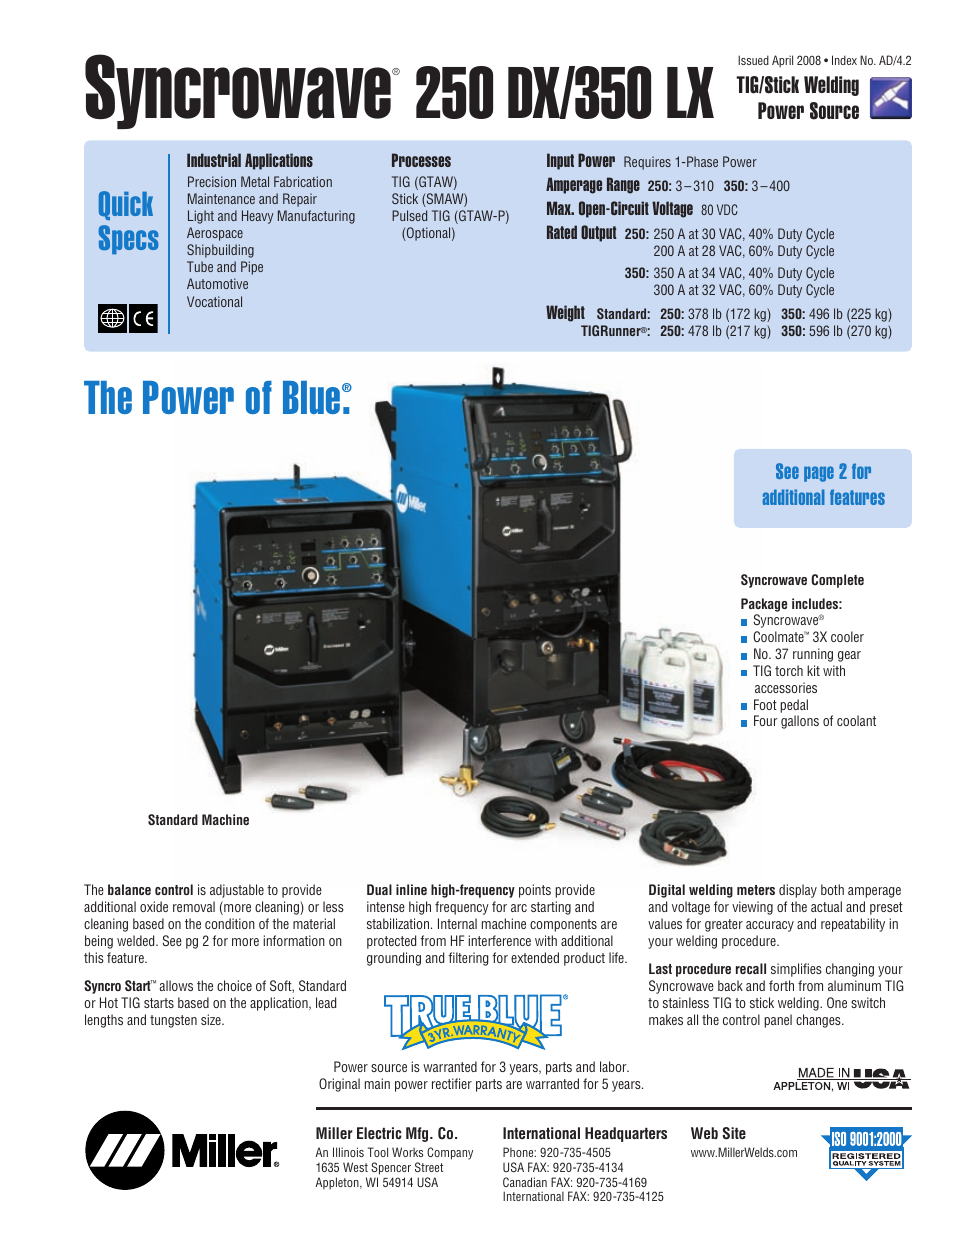 Miller Electric 350 LX User Manual | 8 pages | Also for: 250 DX